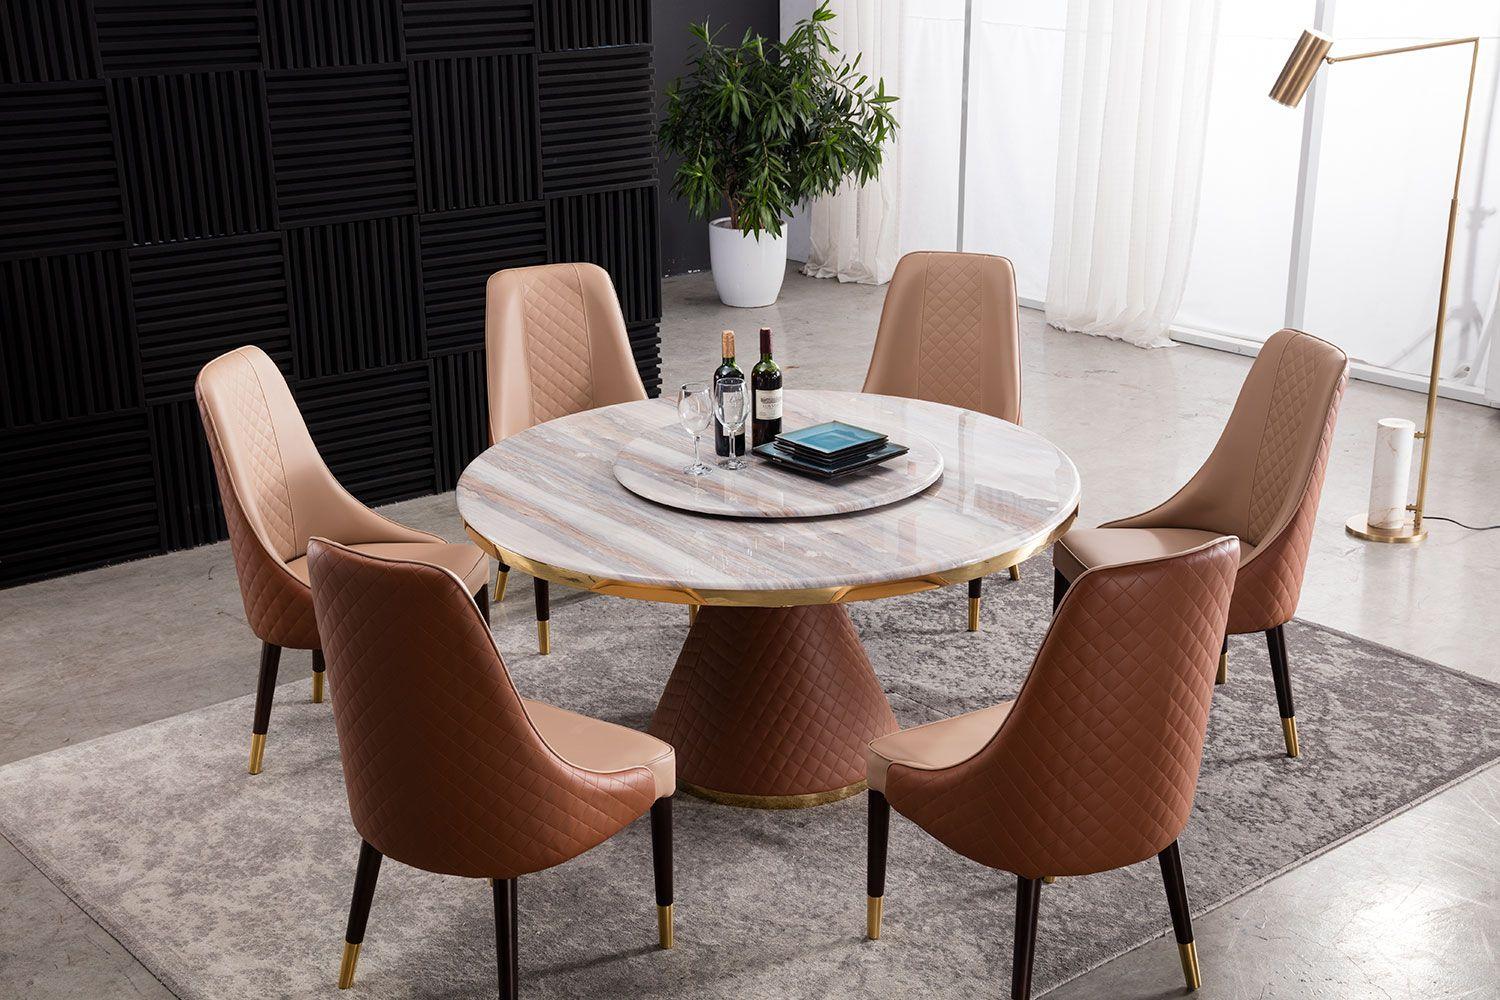 Modern Dining Table Set DT-H216 / CK-H013-BR.TAN DT-H216-5PC in Natural, Tan Faux Leather